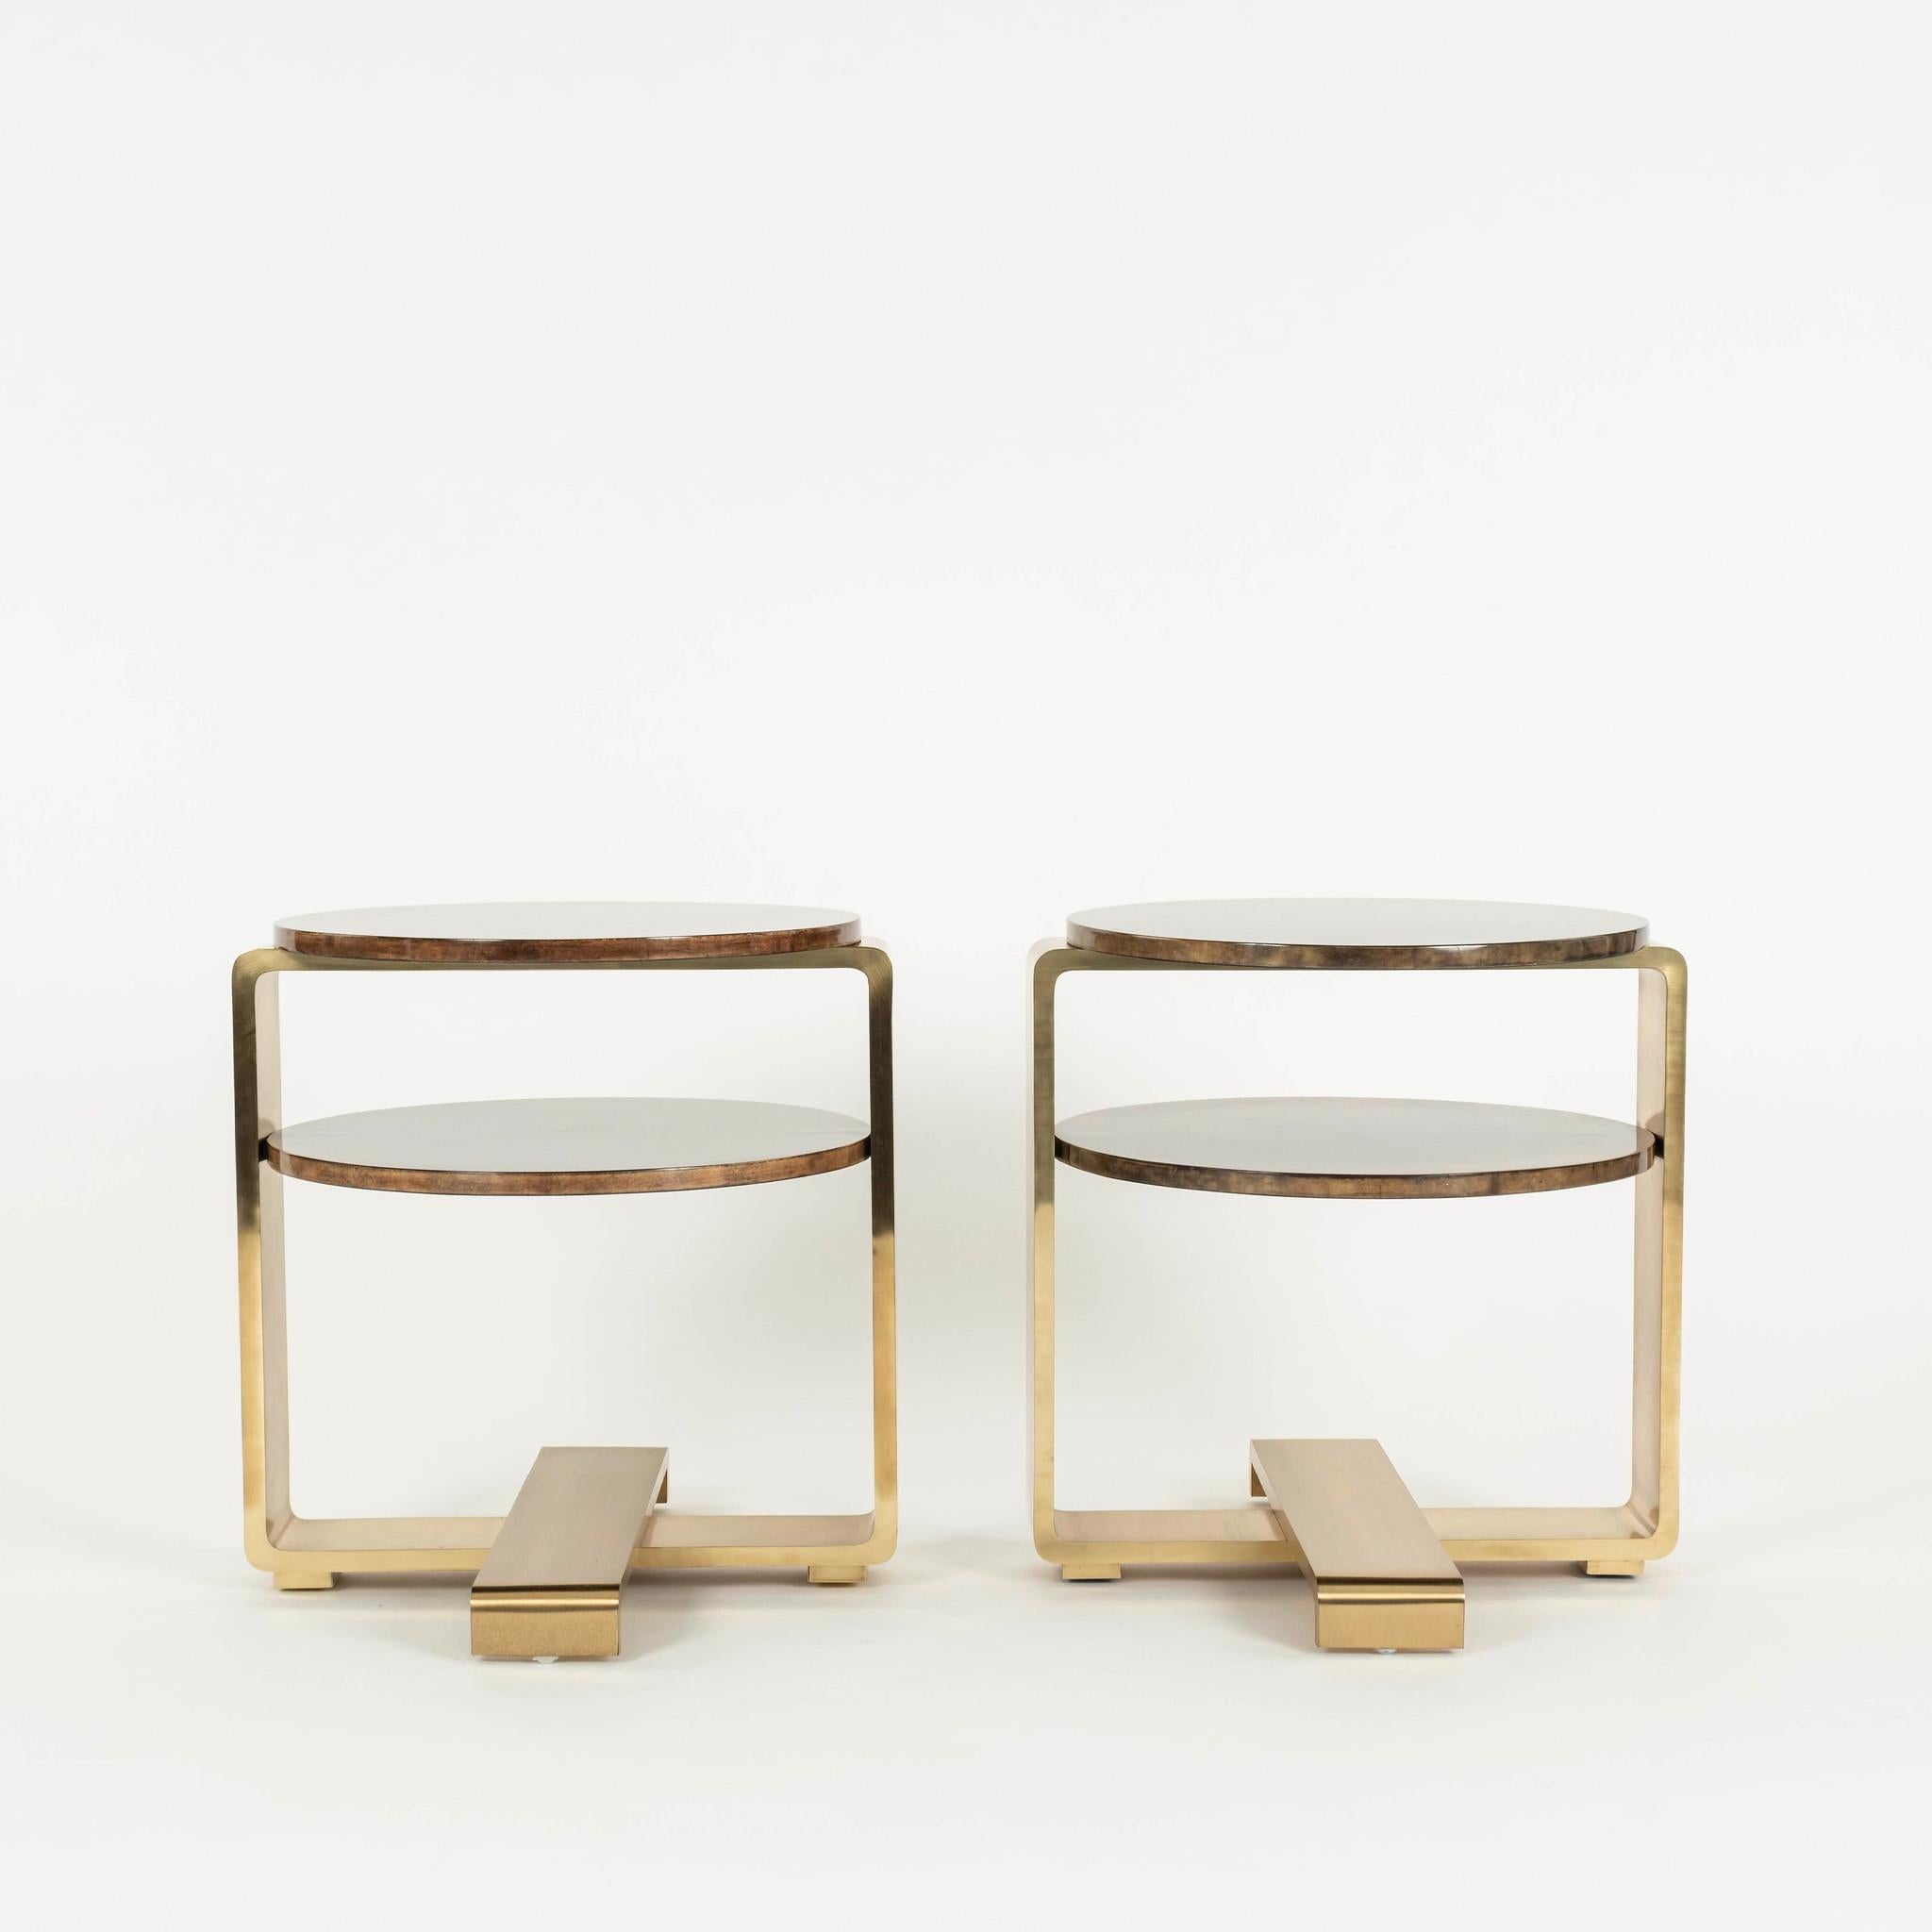 A chic and stylish pair of lacquered polished brass andf goatskin occasional tables handmade by luxury brand Sylvan S.F.